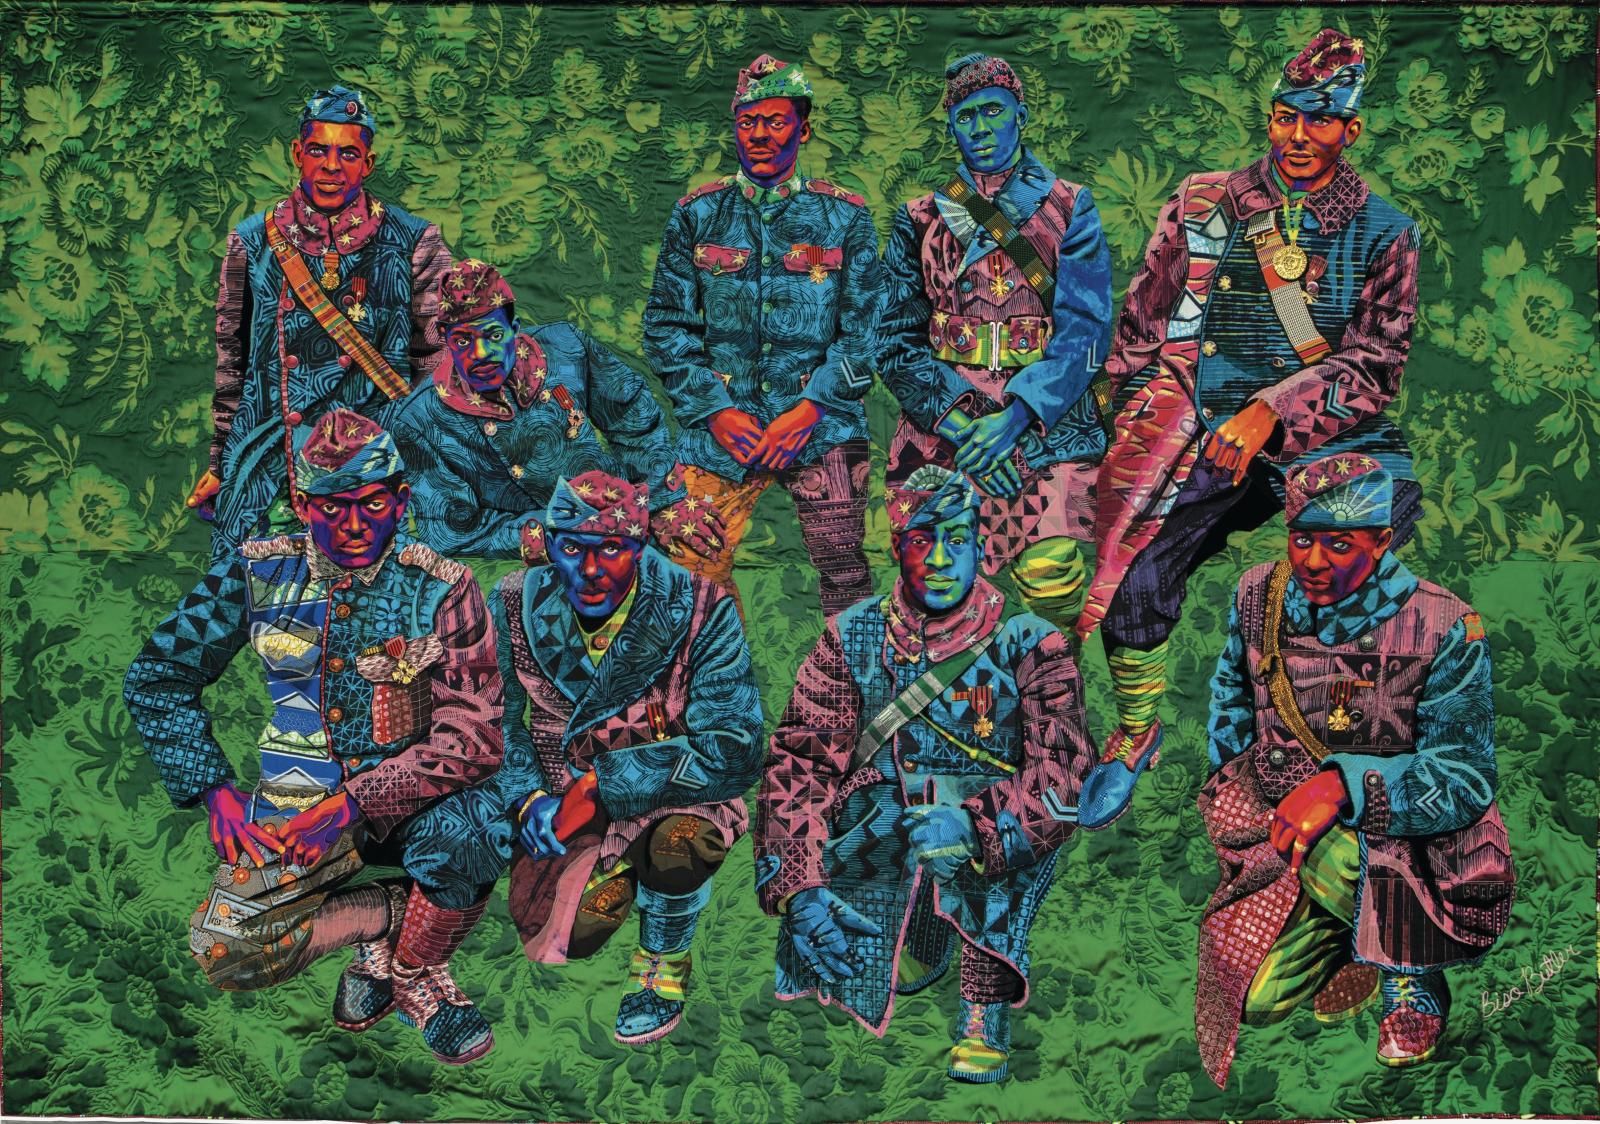 Bisa Butler's quilted art of a group of soldiers